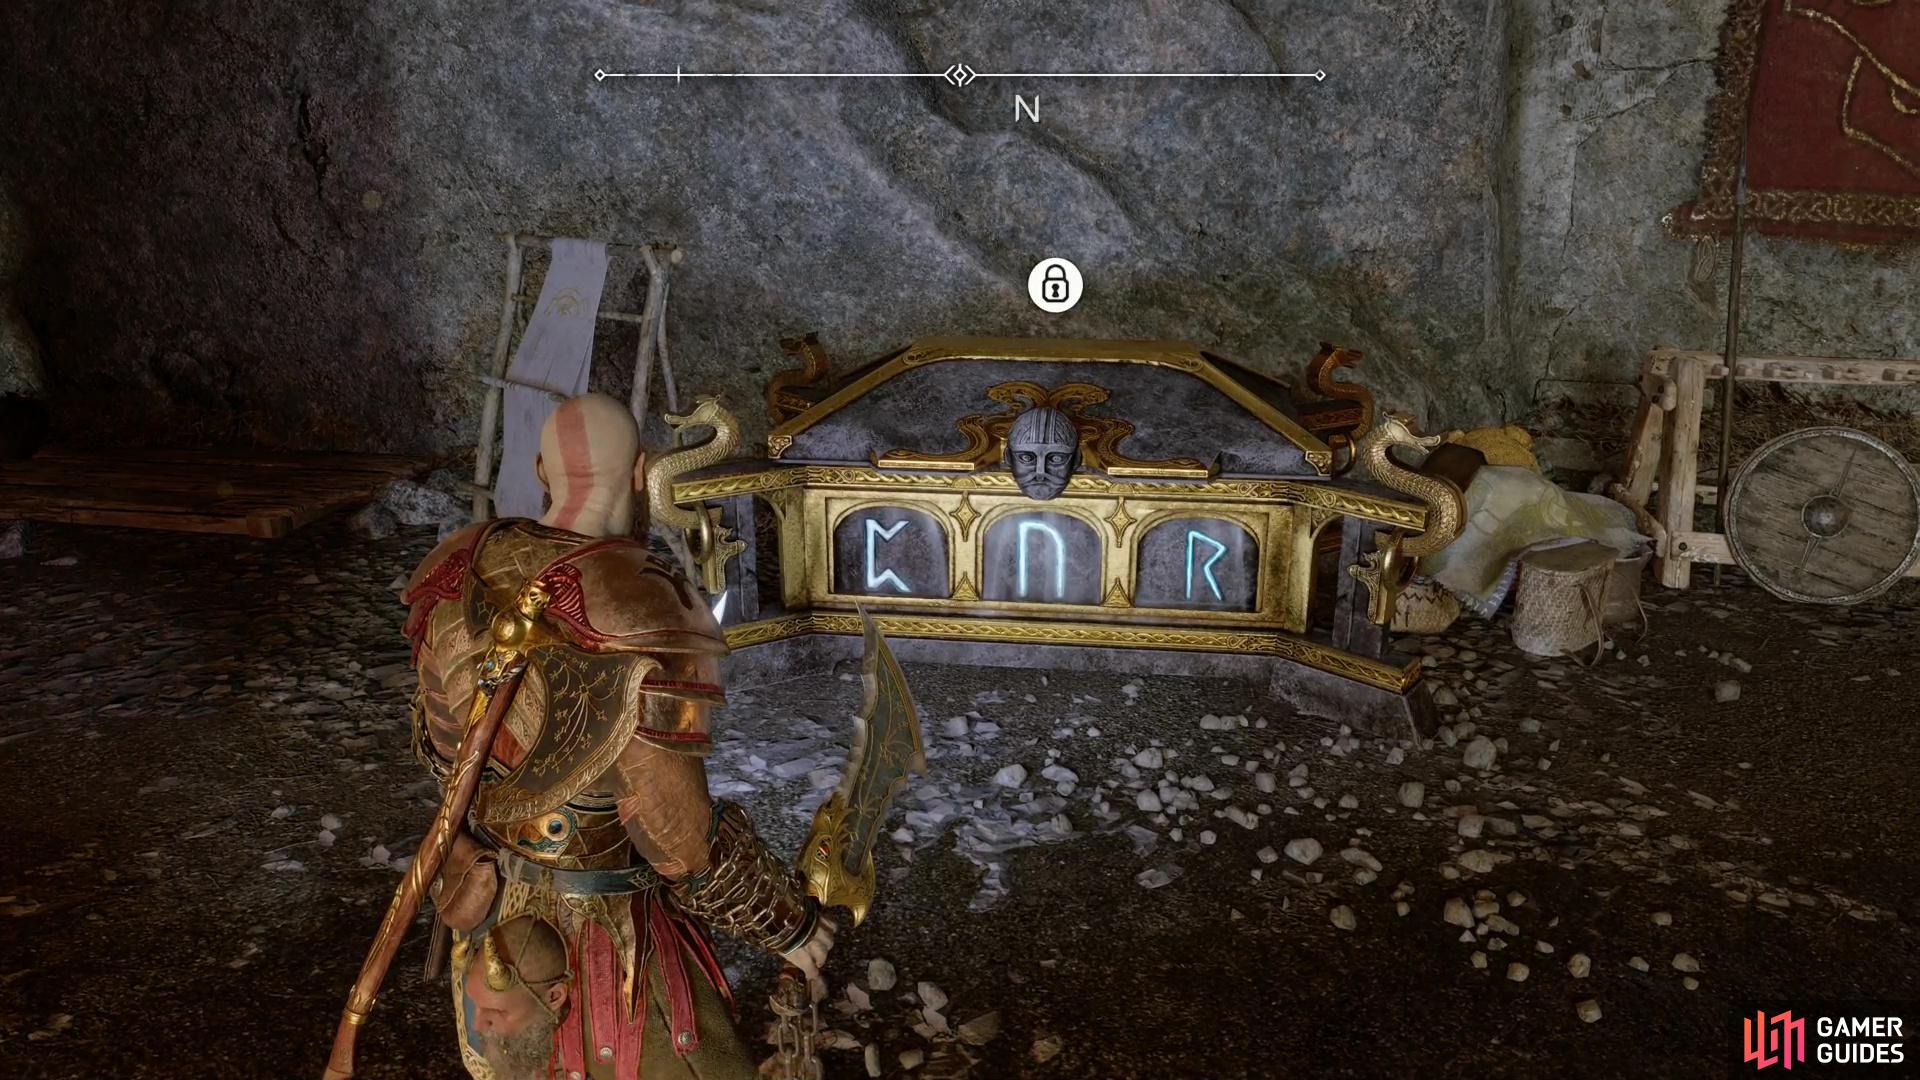 Find a Nornir Chest on a ledge in the Raider Hideout. You'll need to light three rune braziers to open it.